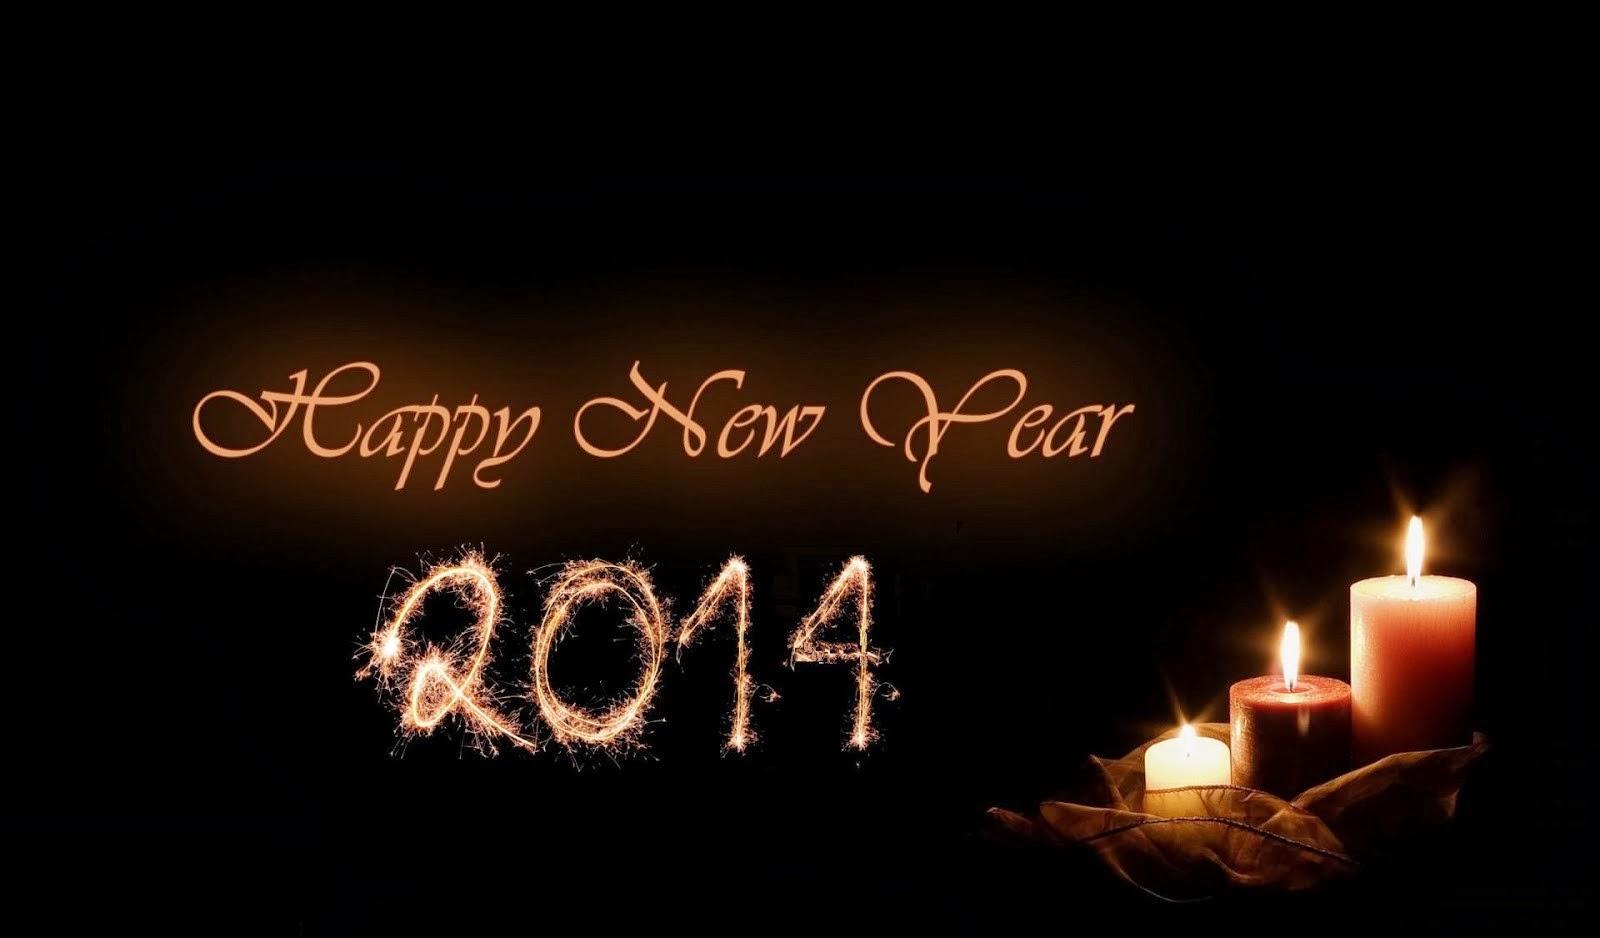 Have A Blessed & Prosperous NY!!